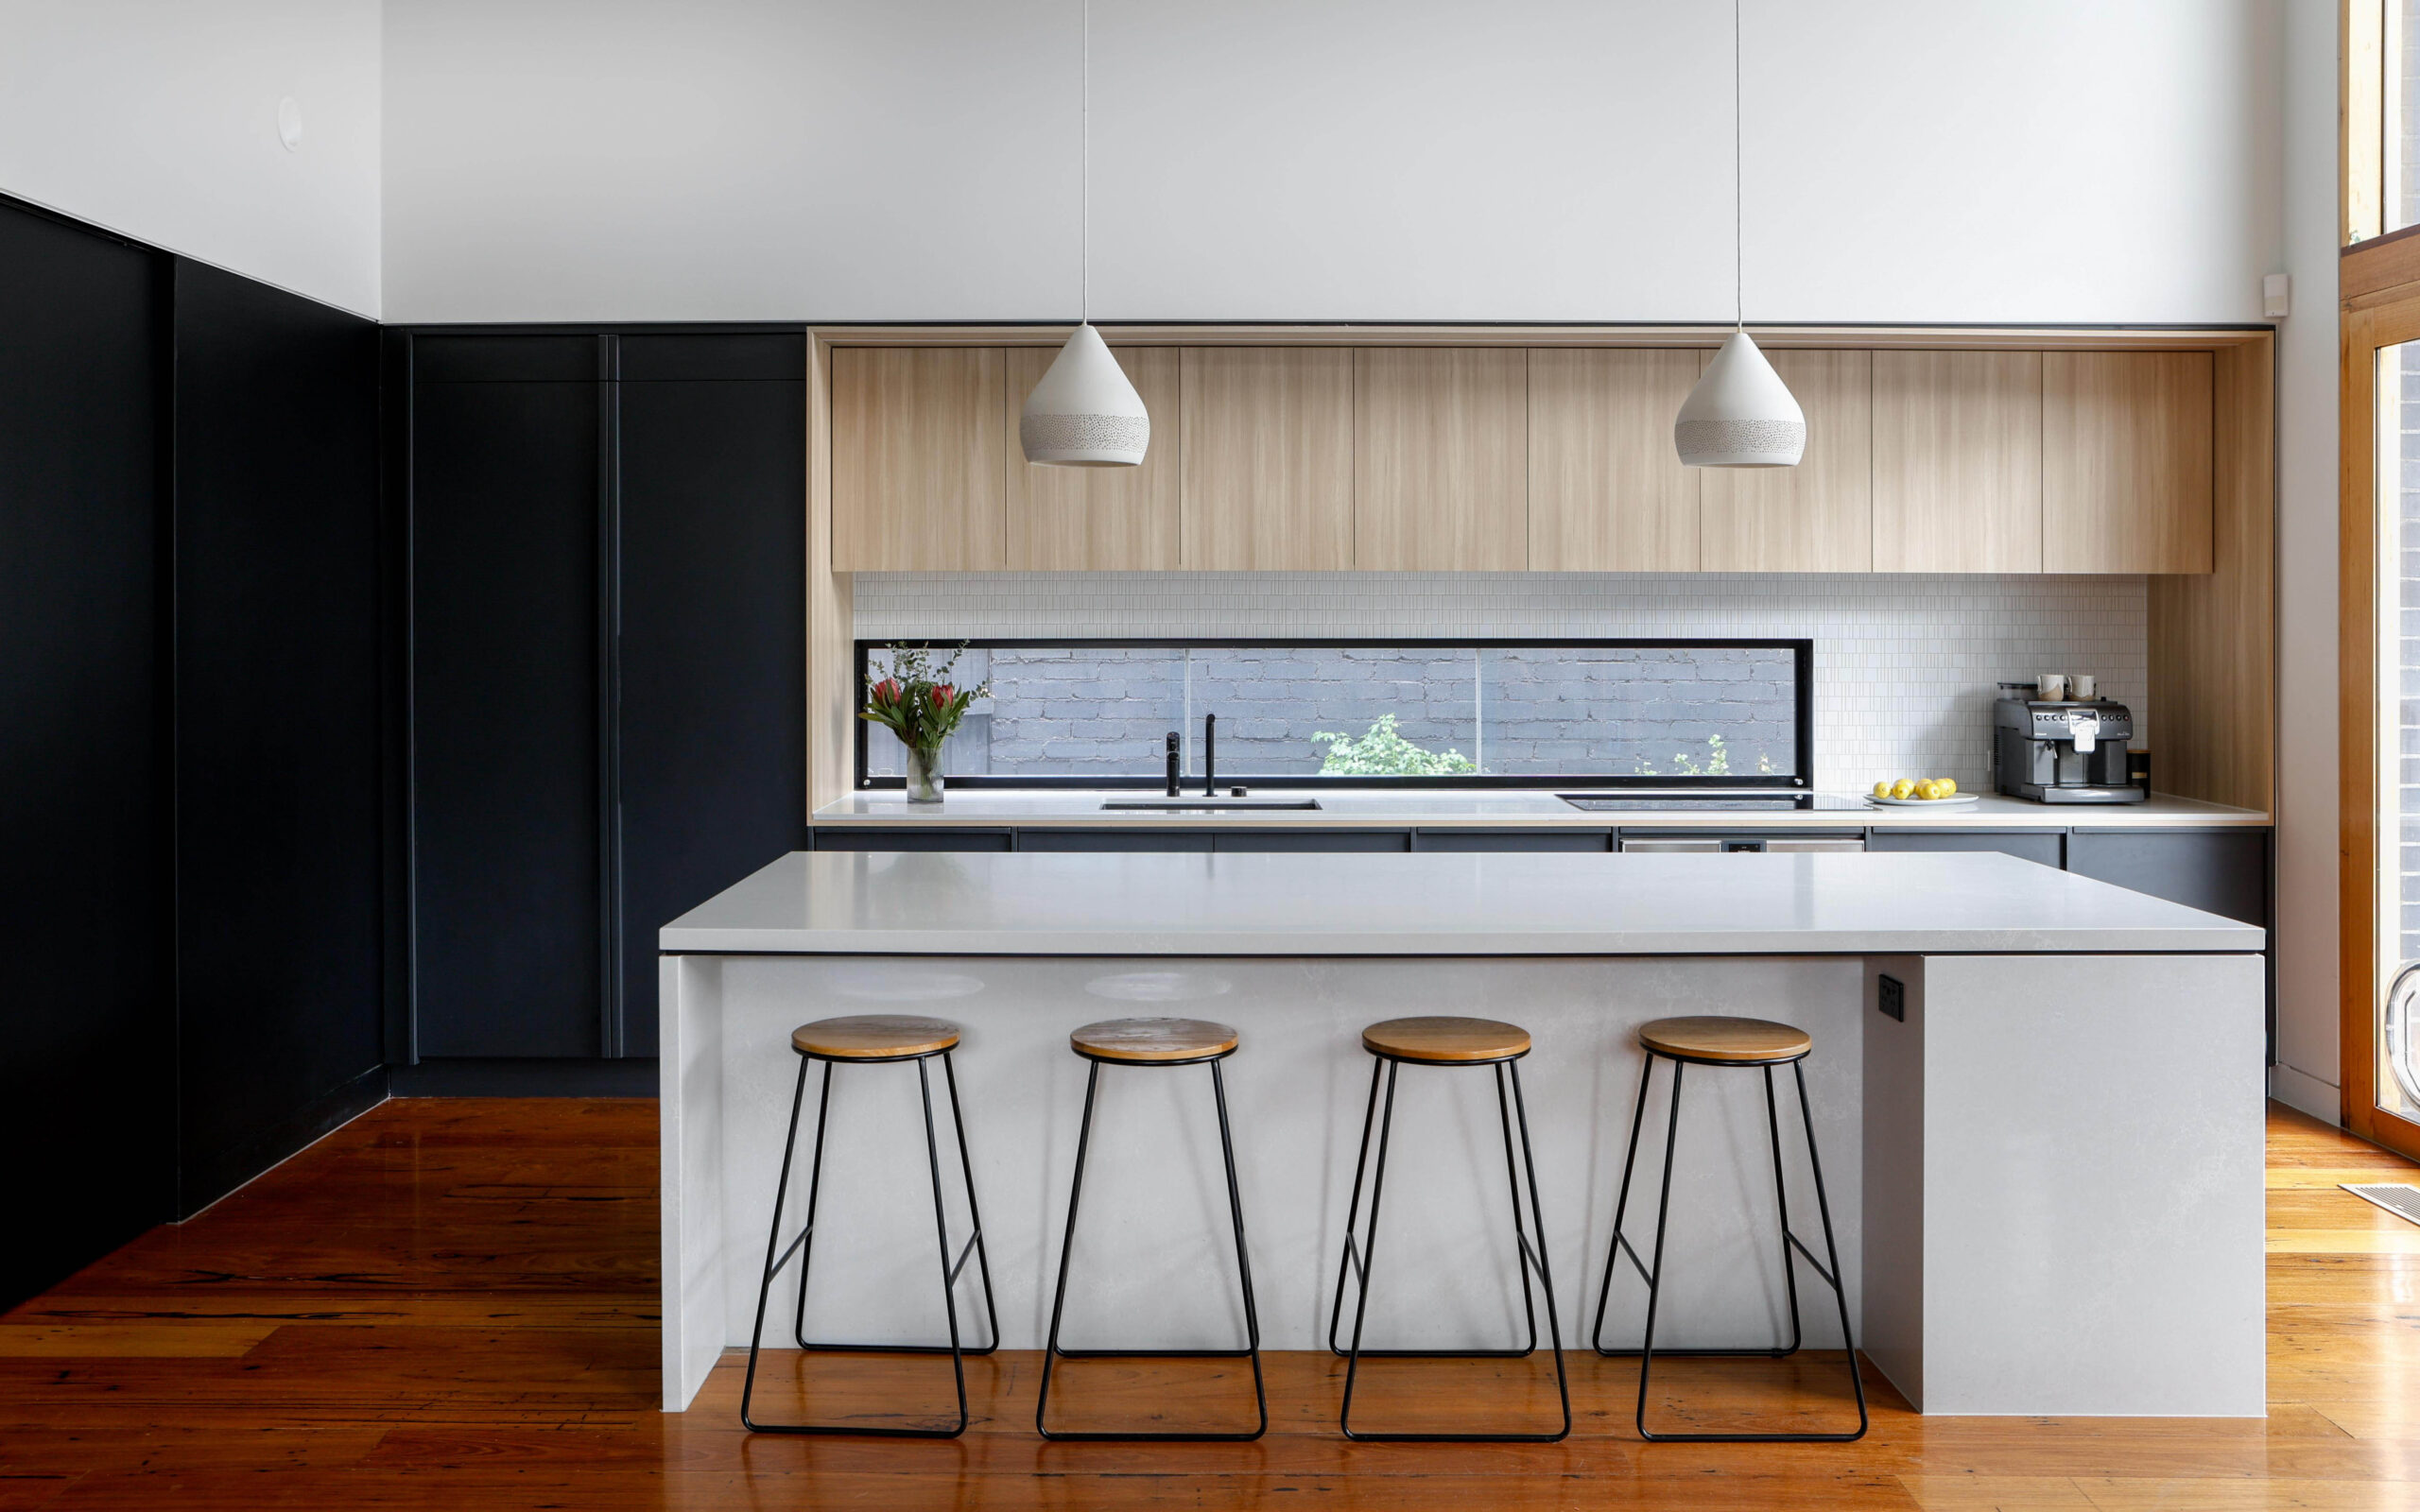 Surrey Hills kitchen renovation by The Inside Project